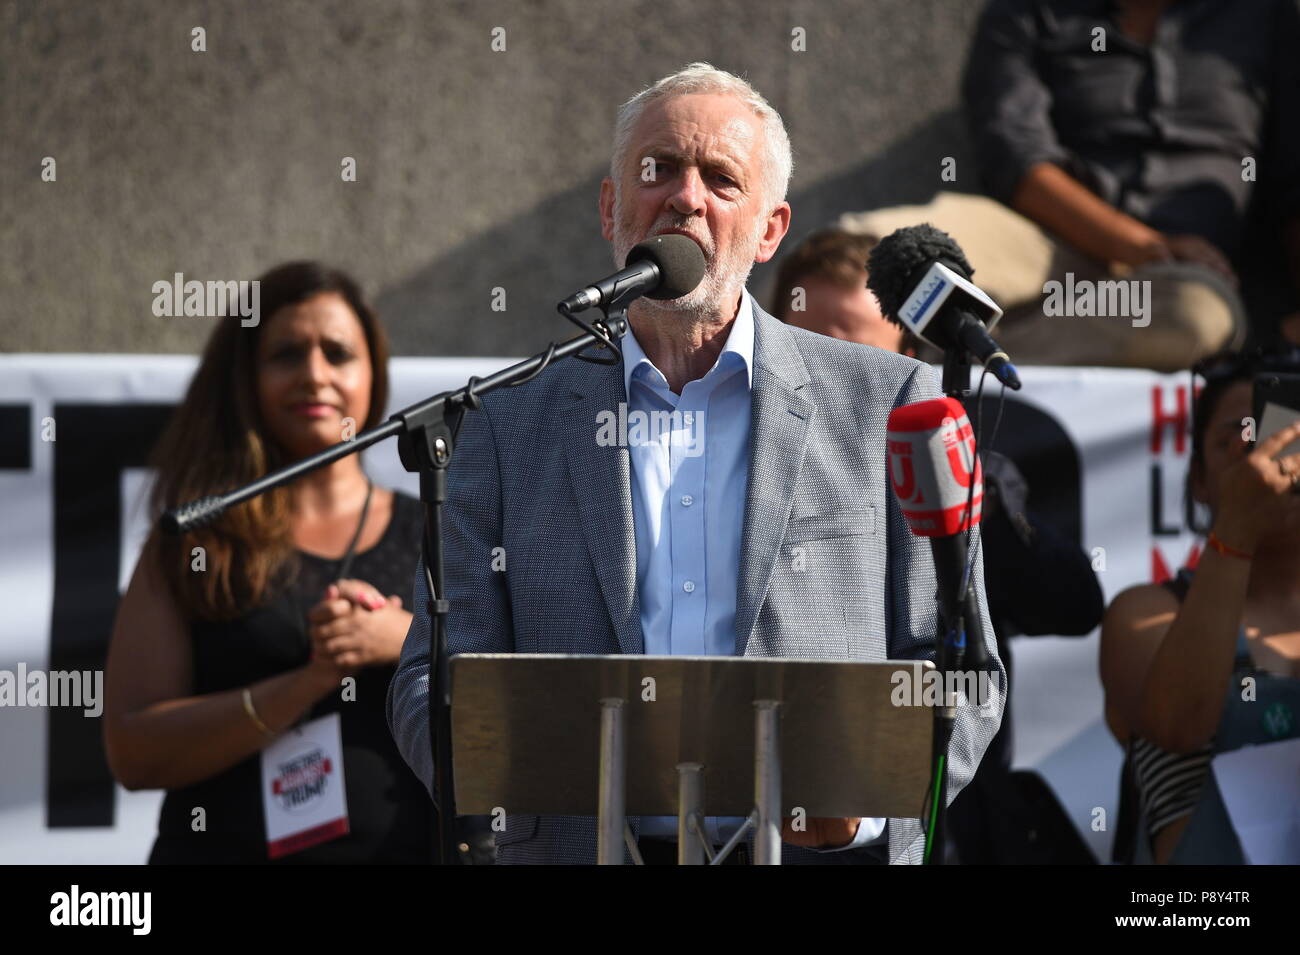 Labour leader Jeremy Corbyn speaks to demonstrators marching through London, during protests against the visit of US President Donald Trump to the UK. Stock Photo